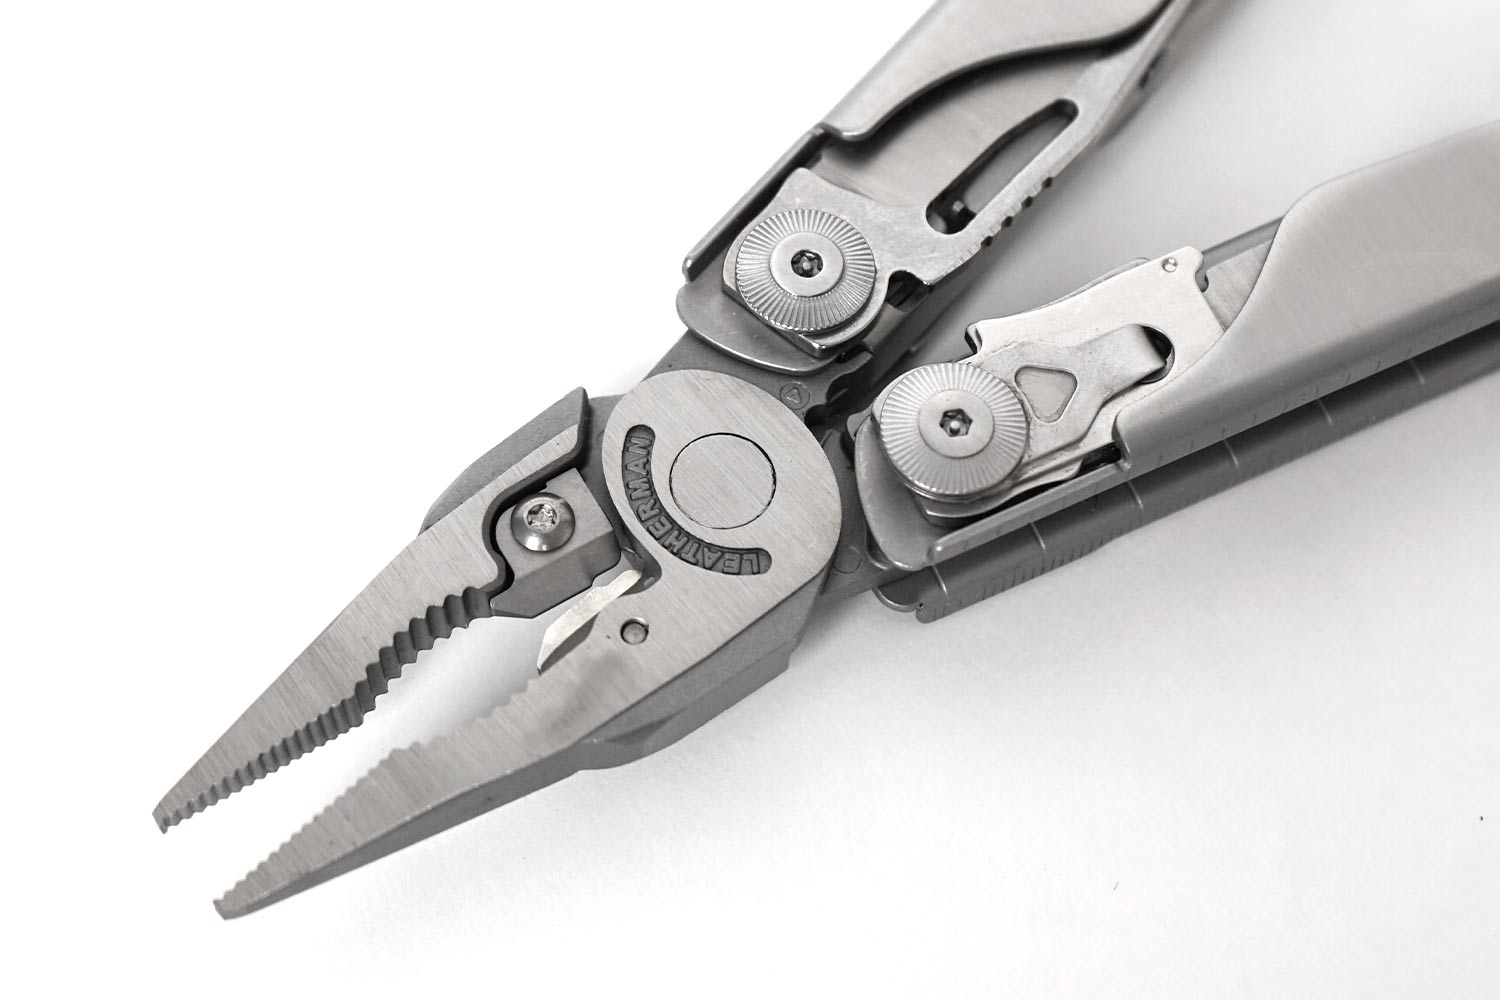 The detail of the Leatherman Surge pliers